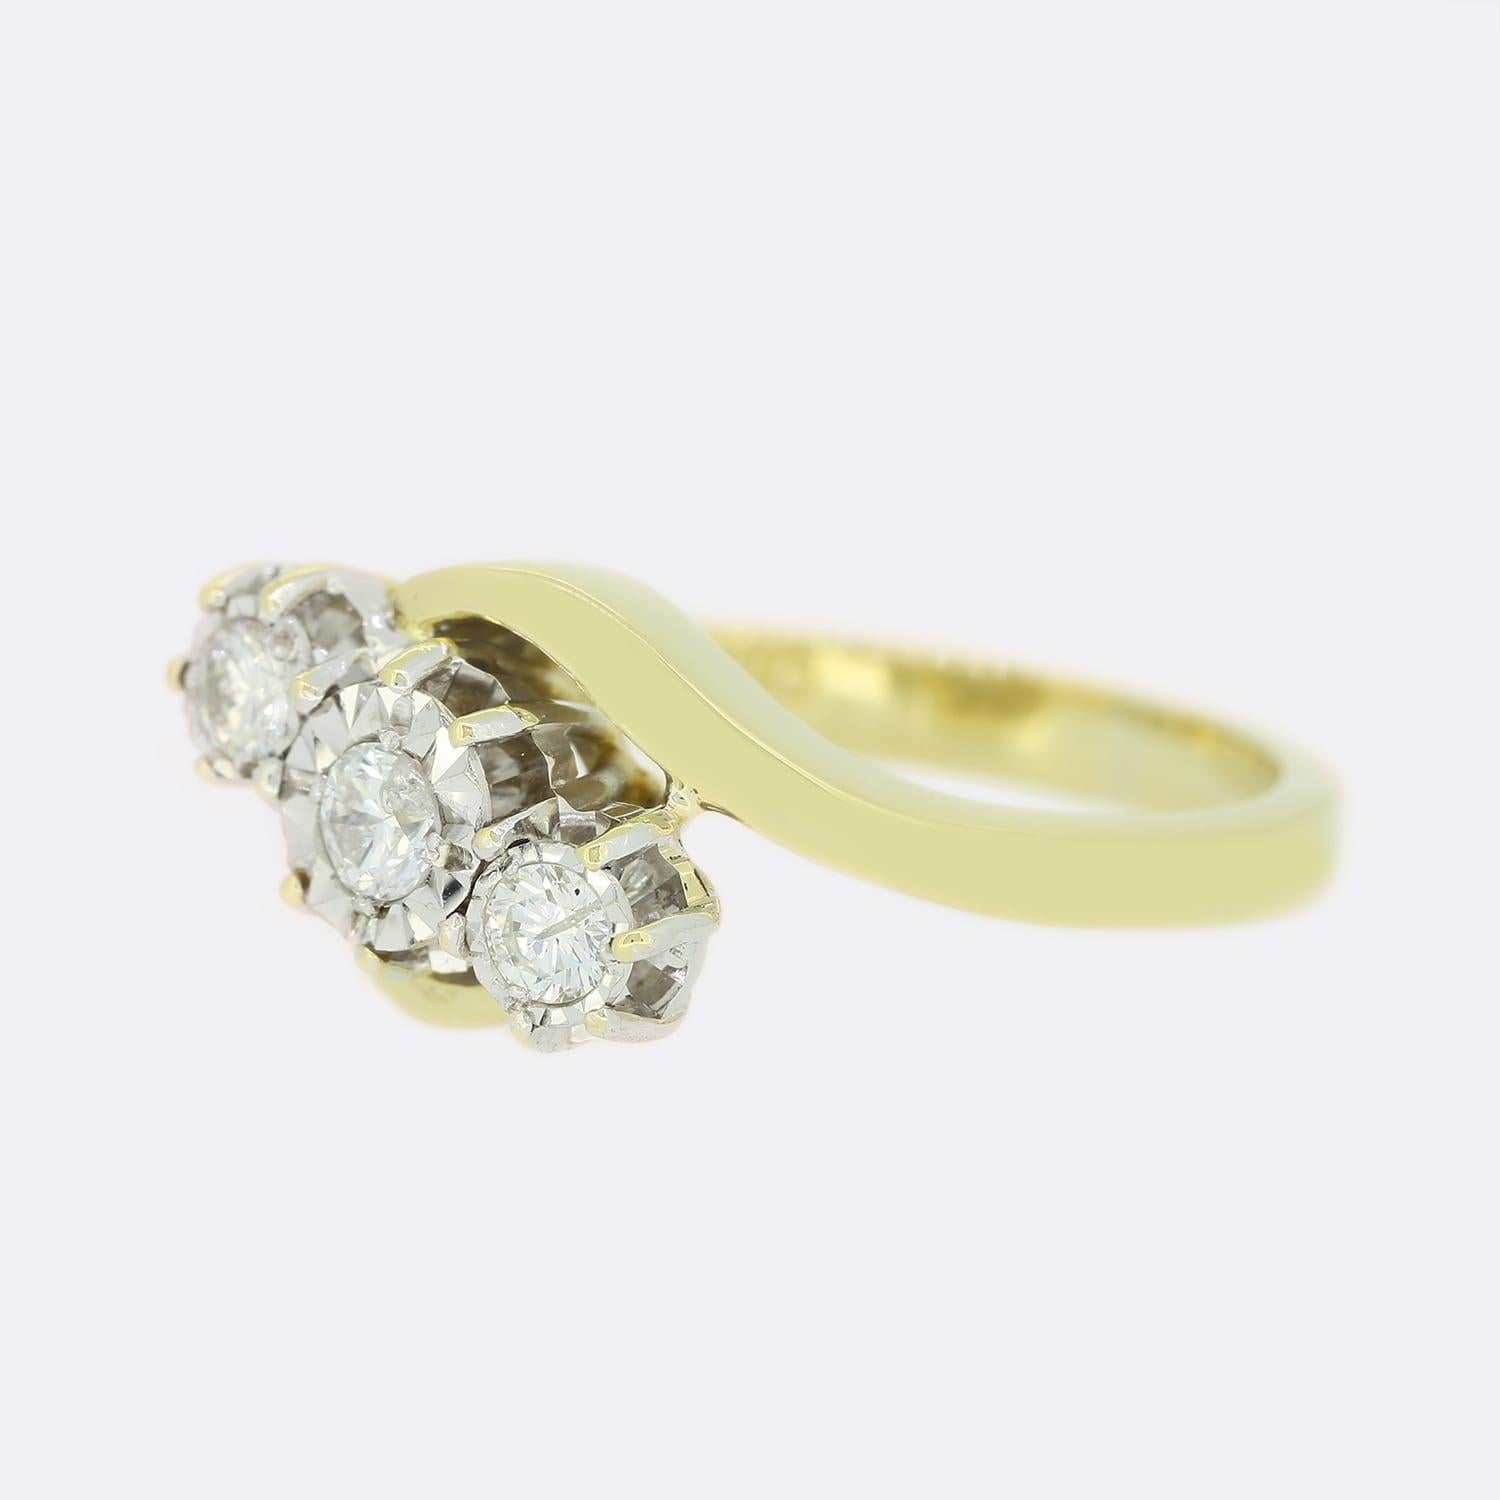 This is an 18ct yellow gold diamond crossover ring. The 3 diamonds are illusion set in white gold to make them appear slightly larger.

Condition: Used (Very Good)
Weight: 4.9 grams
Size: L 1/2
Total Diamond Carat Weight: 0.25 carats
Diamond